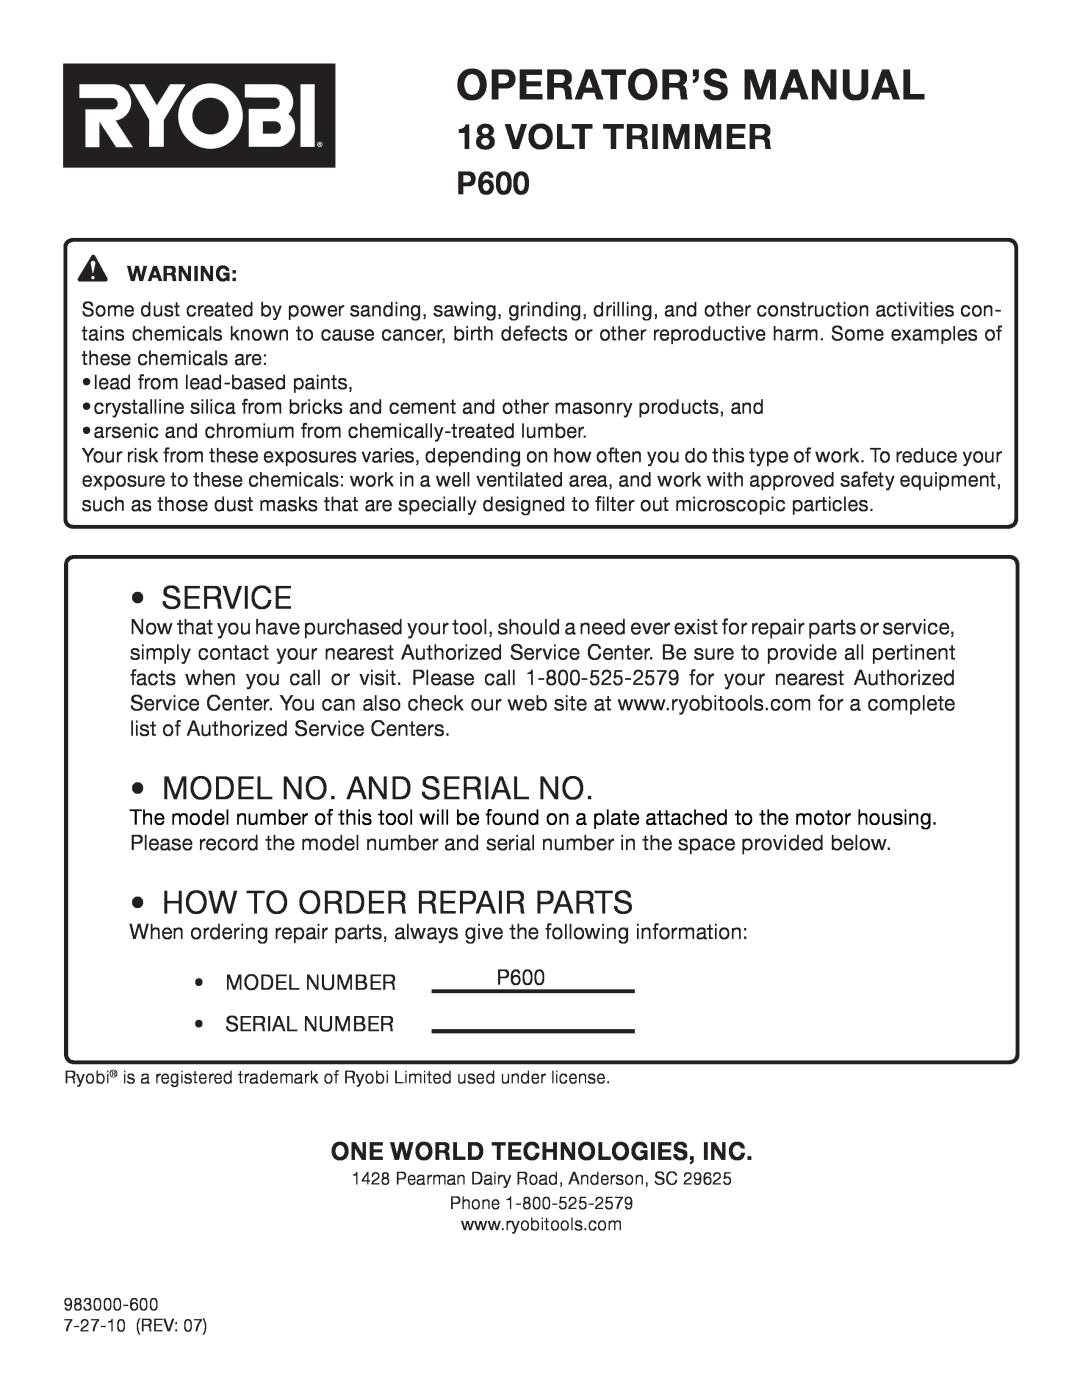 Ryobi P600 Service, Model No. And Serial No, How To Order Repair Parts, One World Technologies, Inc, Operator’S Manual 